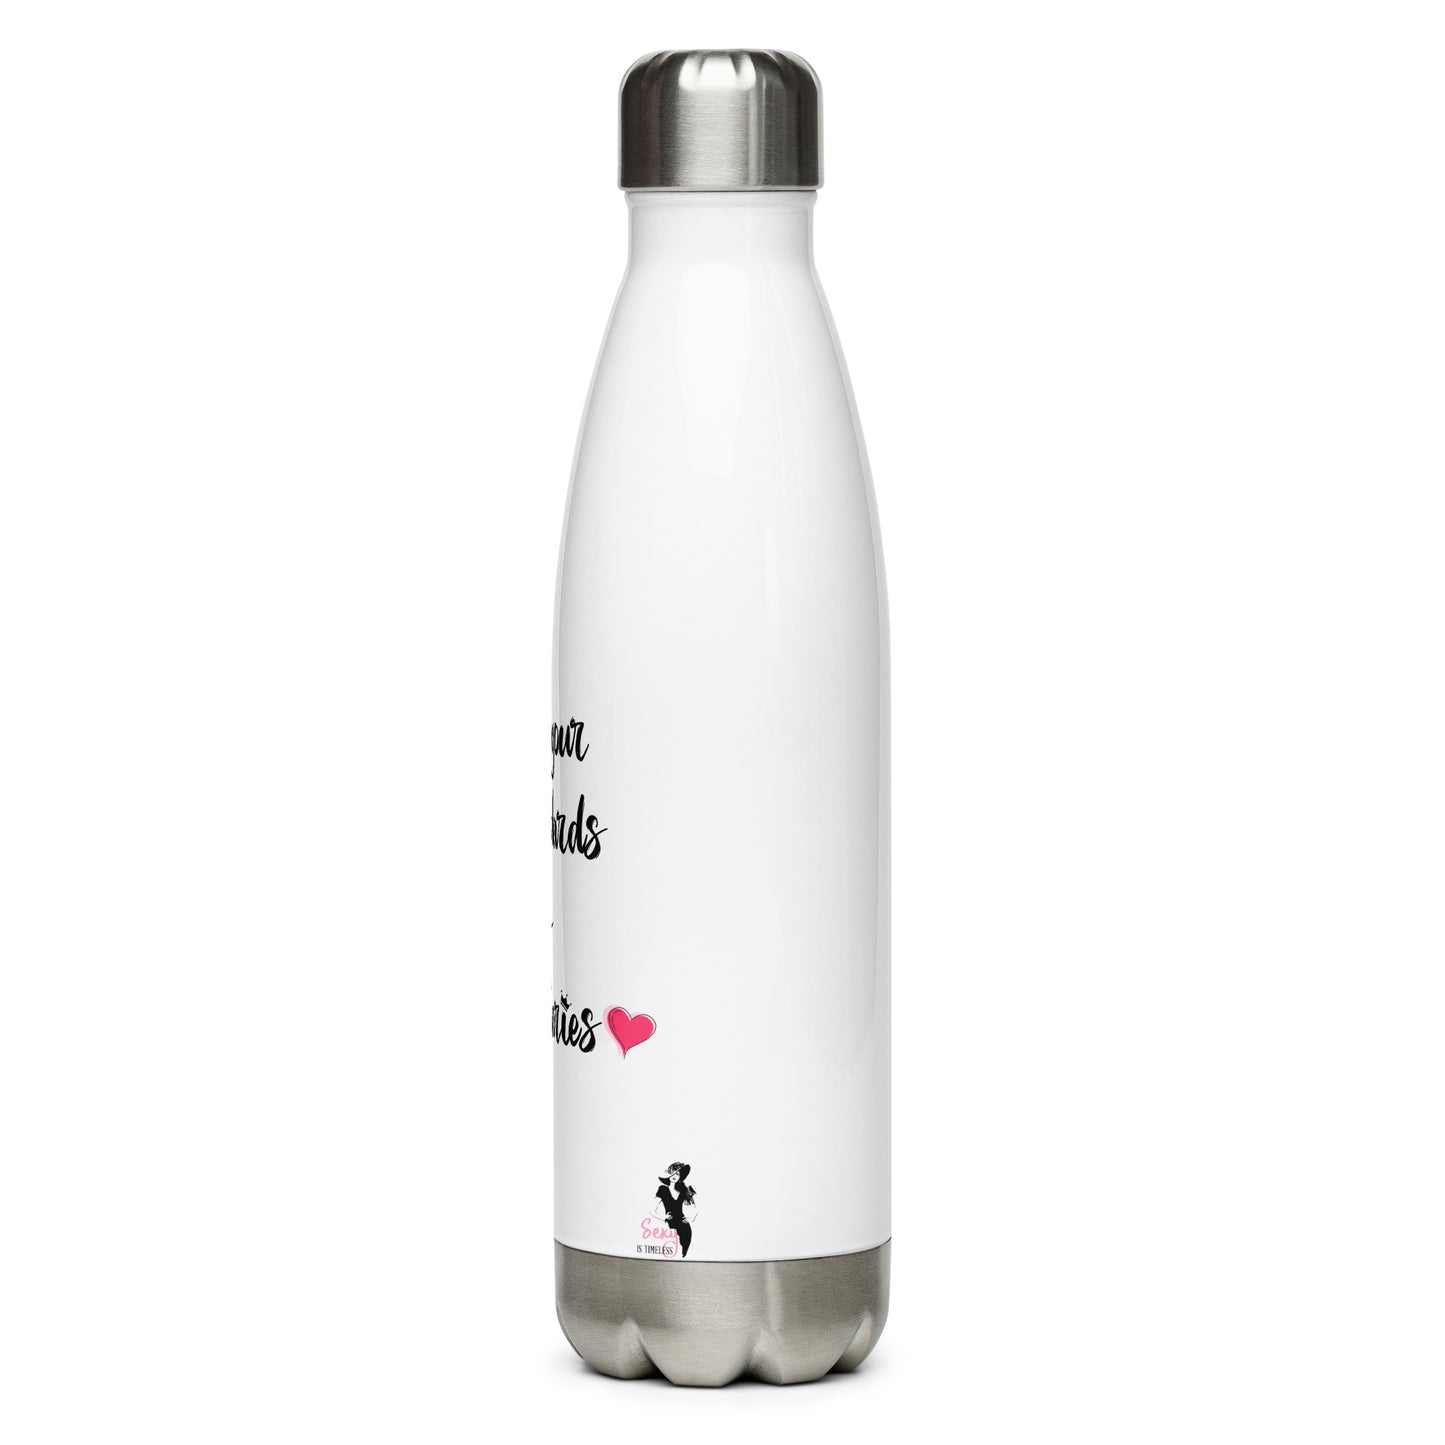 Stainless Steel Water Bottle - Own your standards and boundaries